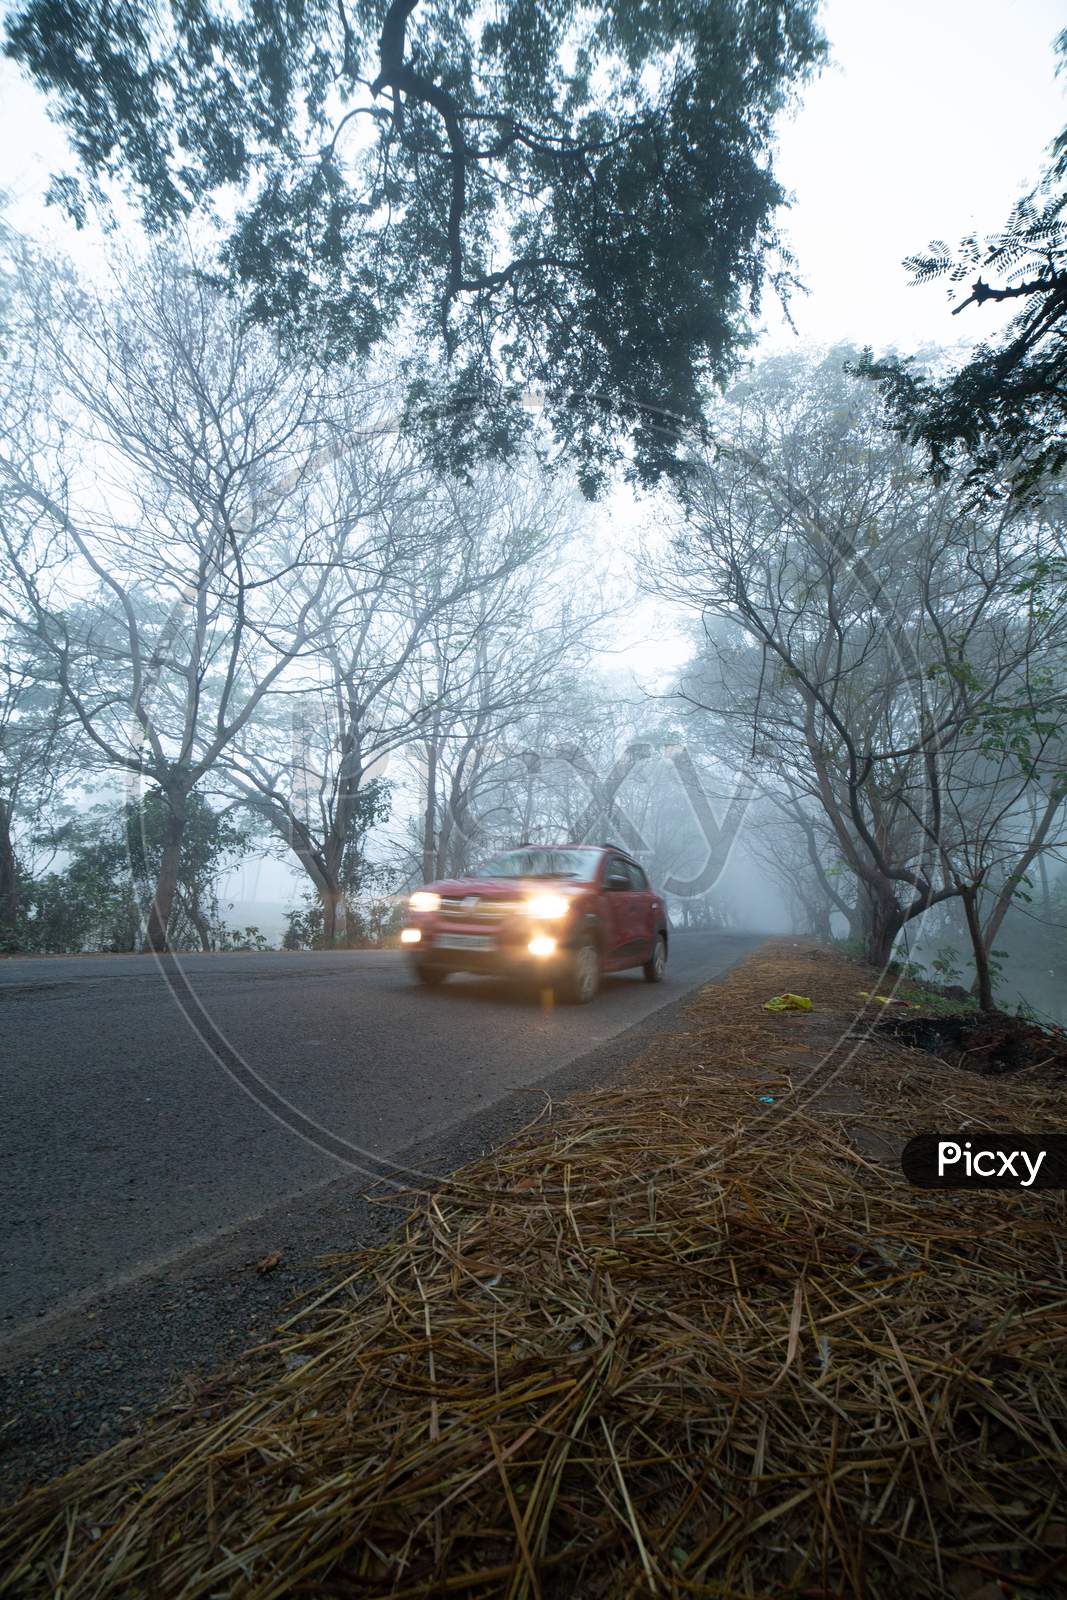 Vehicles On a Rural Village Road With Canopy Of Trees On an Winter Morning